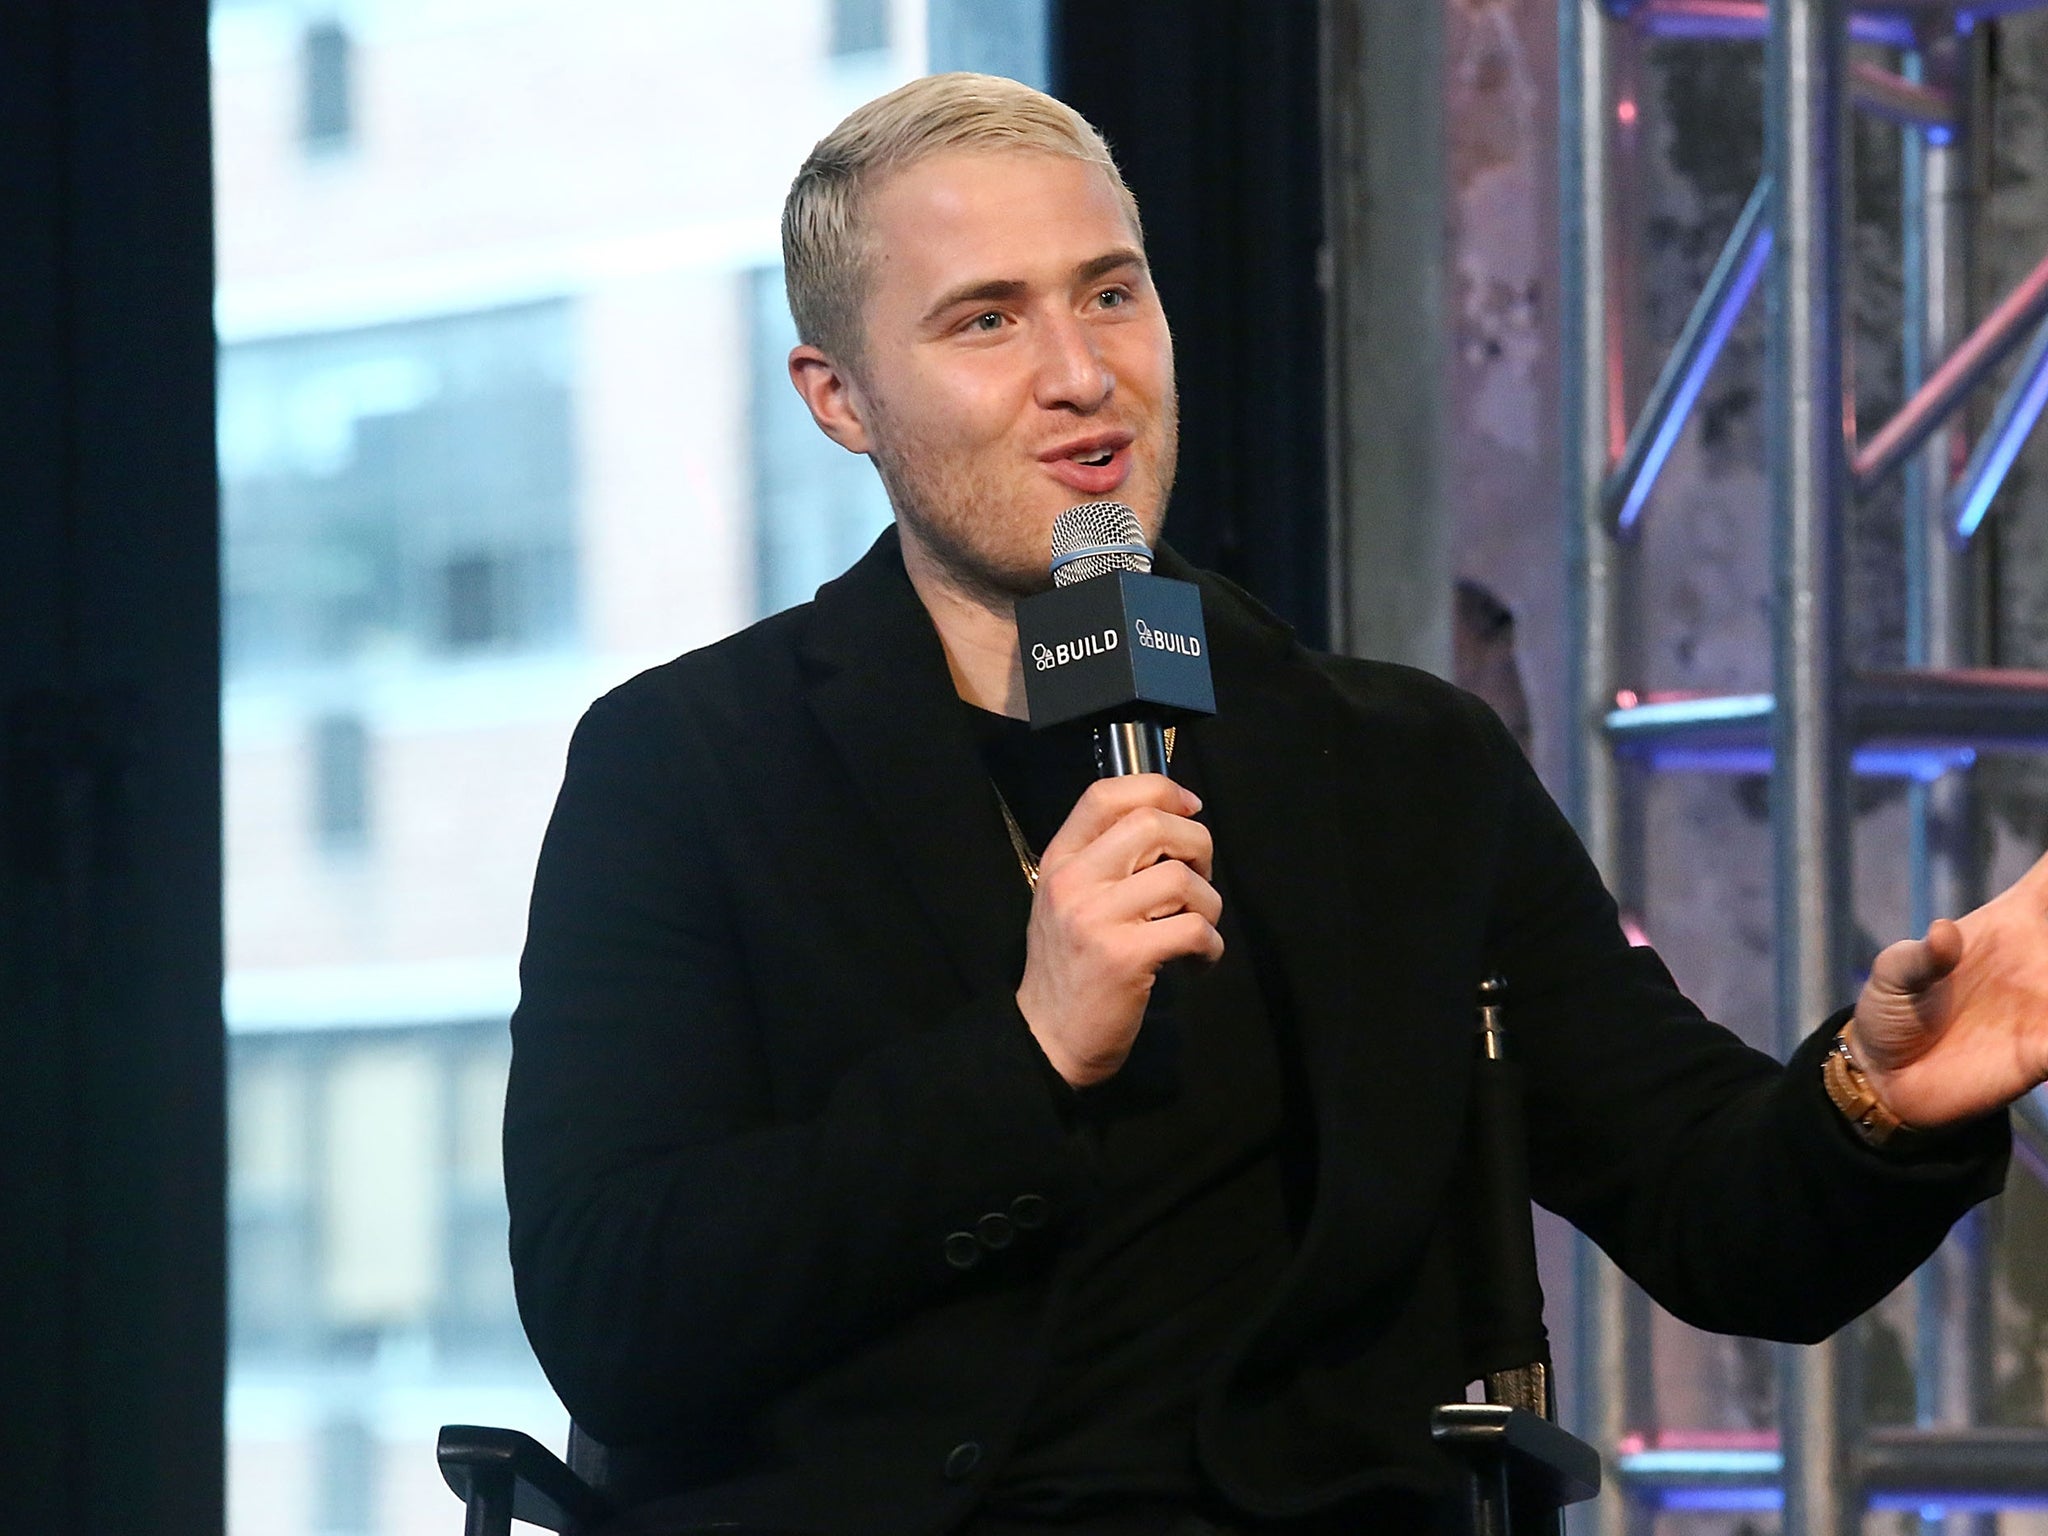 Mike Posner attends AOL Build Presents "The Truth" at AOL Studios